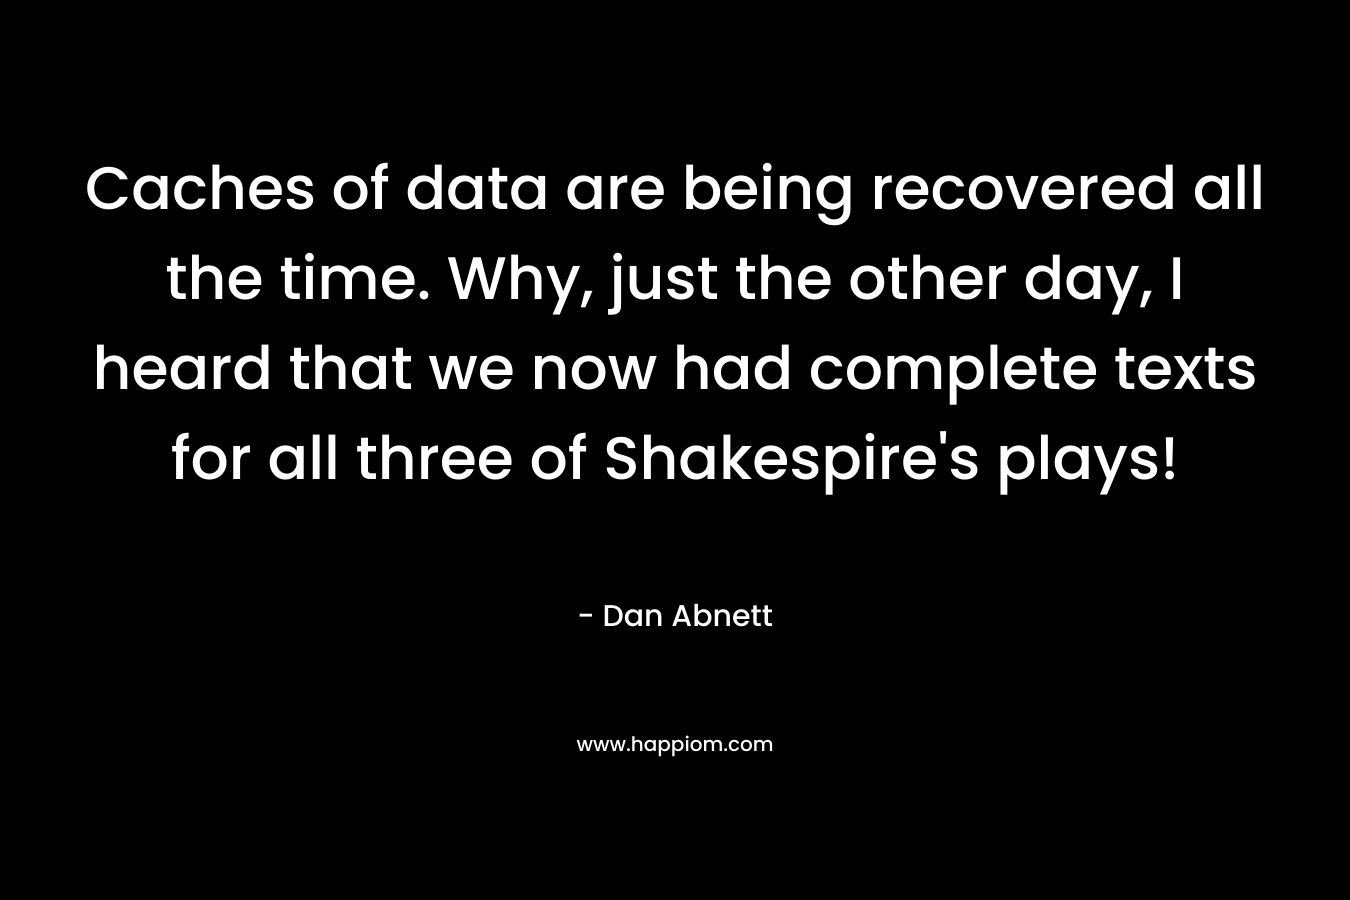 Caches of data are being recovered all the time. Why, just the other day, I heard that we now had complete texts for all three of Shakespire’s plays! – Dan Abnett